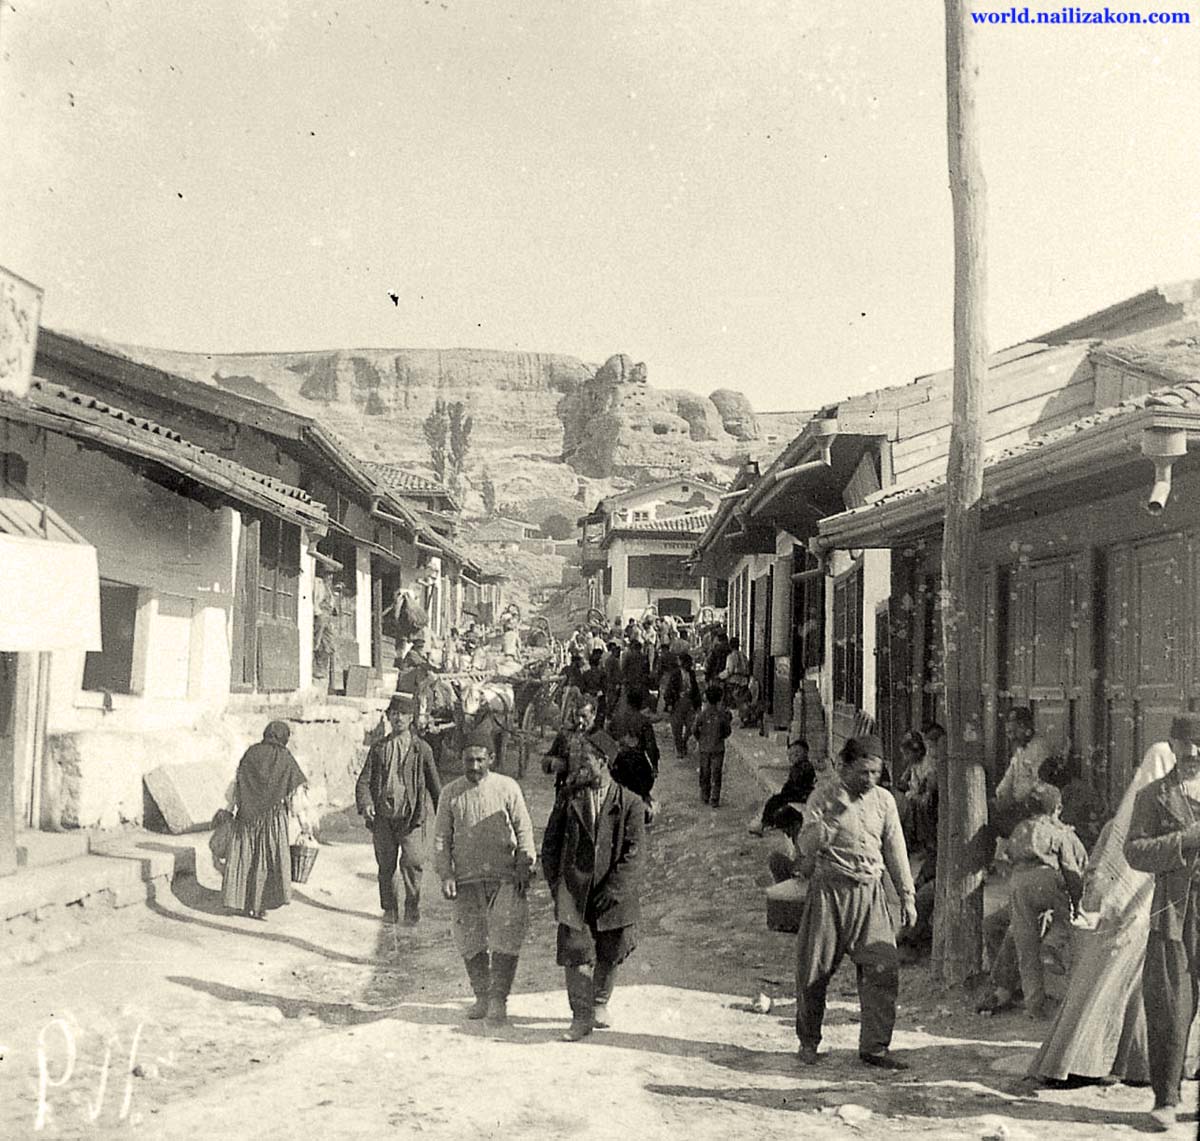 Bakhchysarai. The streets of the town